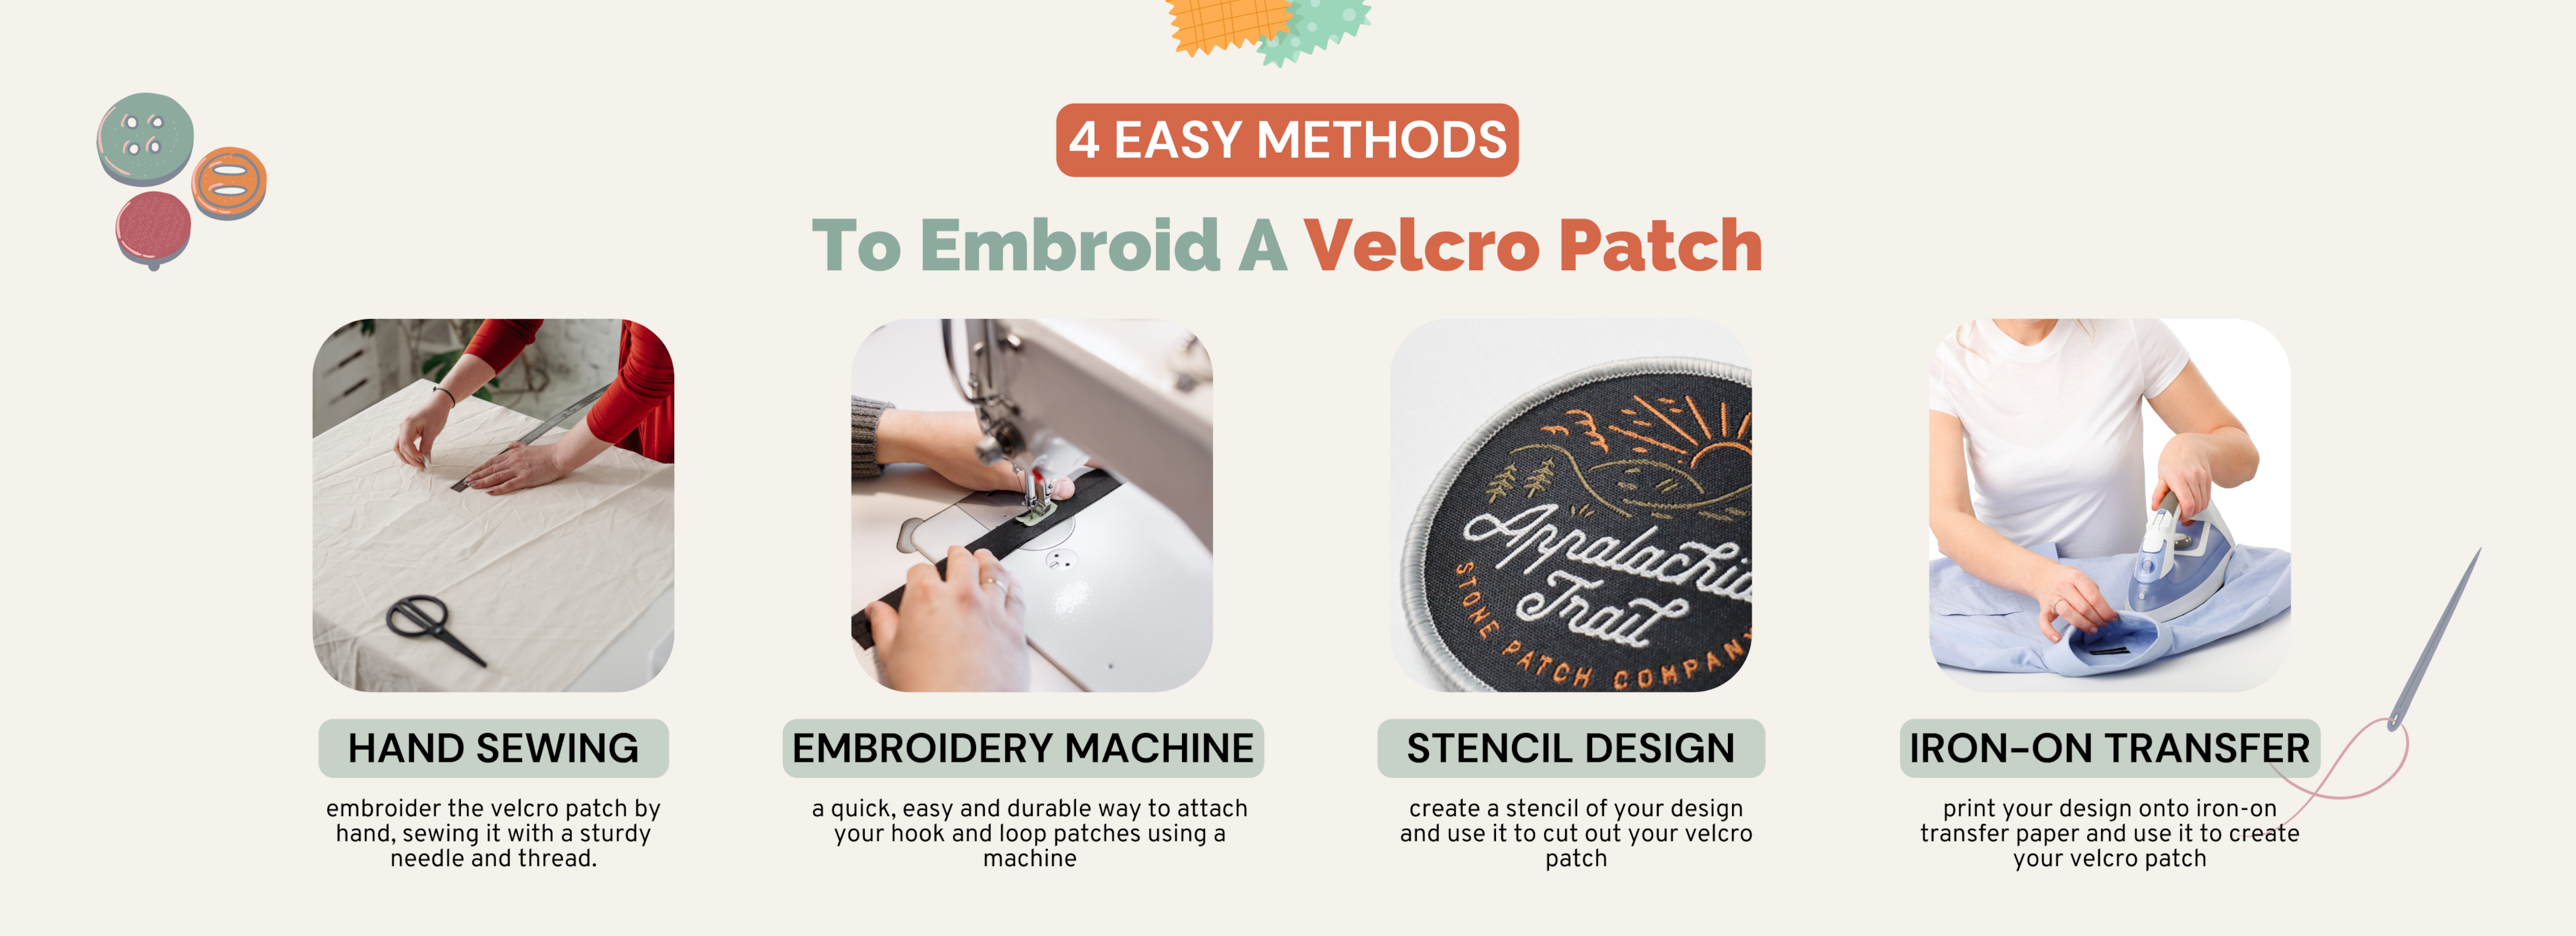 Velcro Patches - Everything You Need To Know